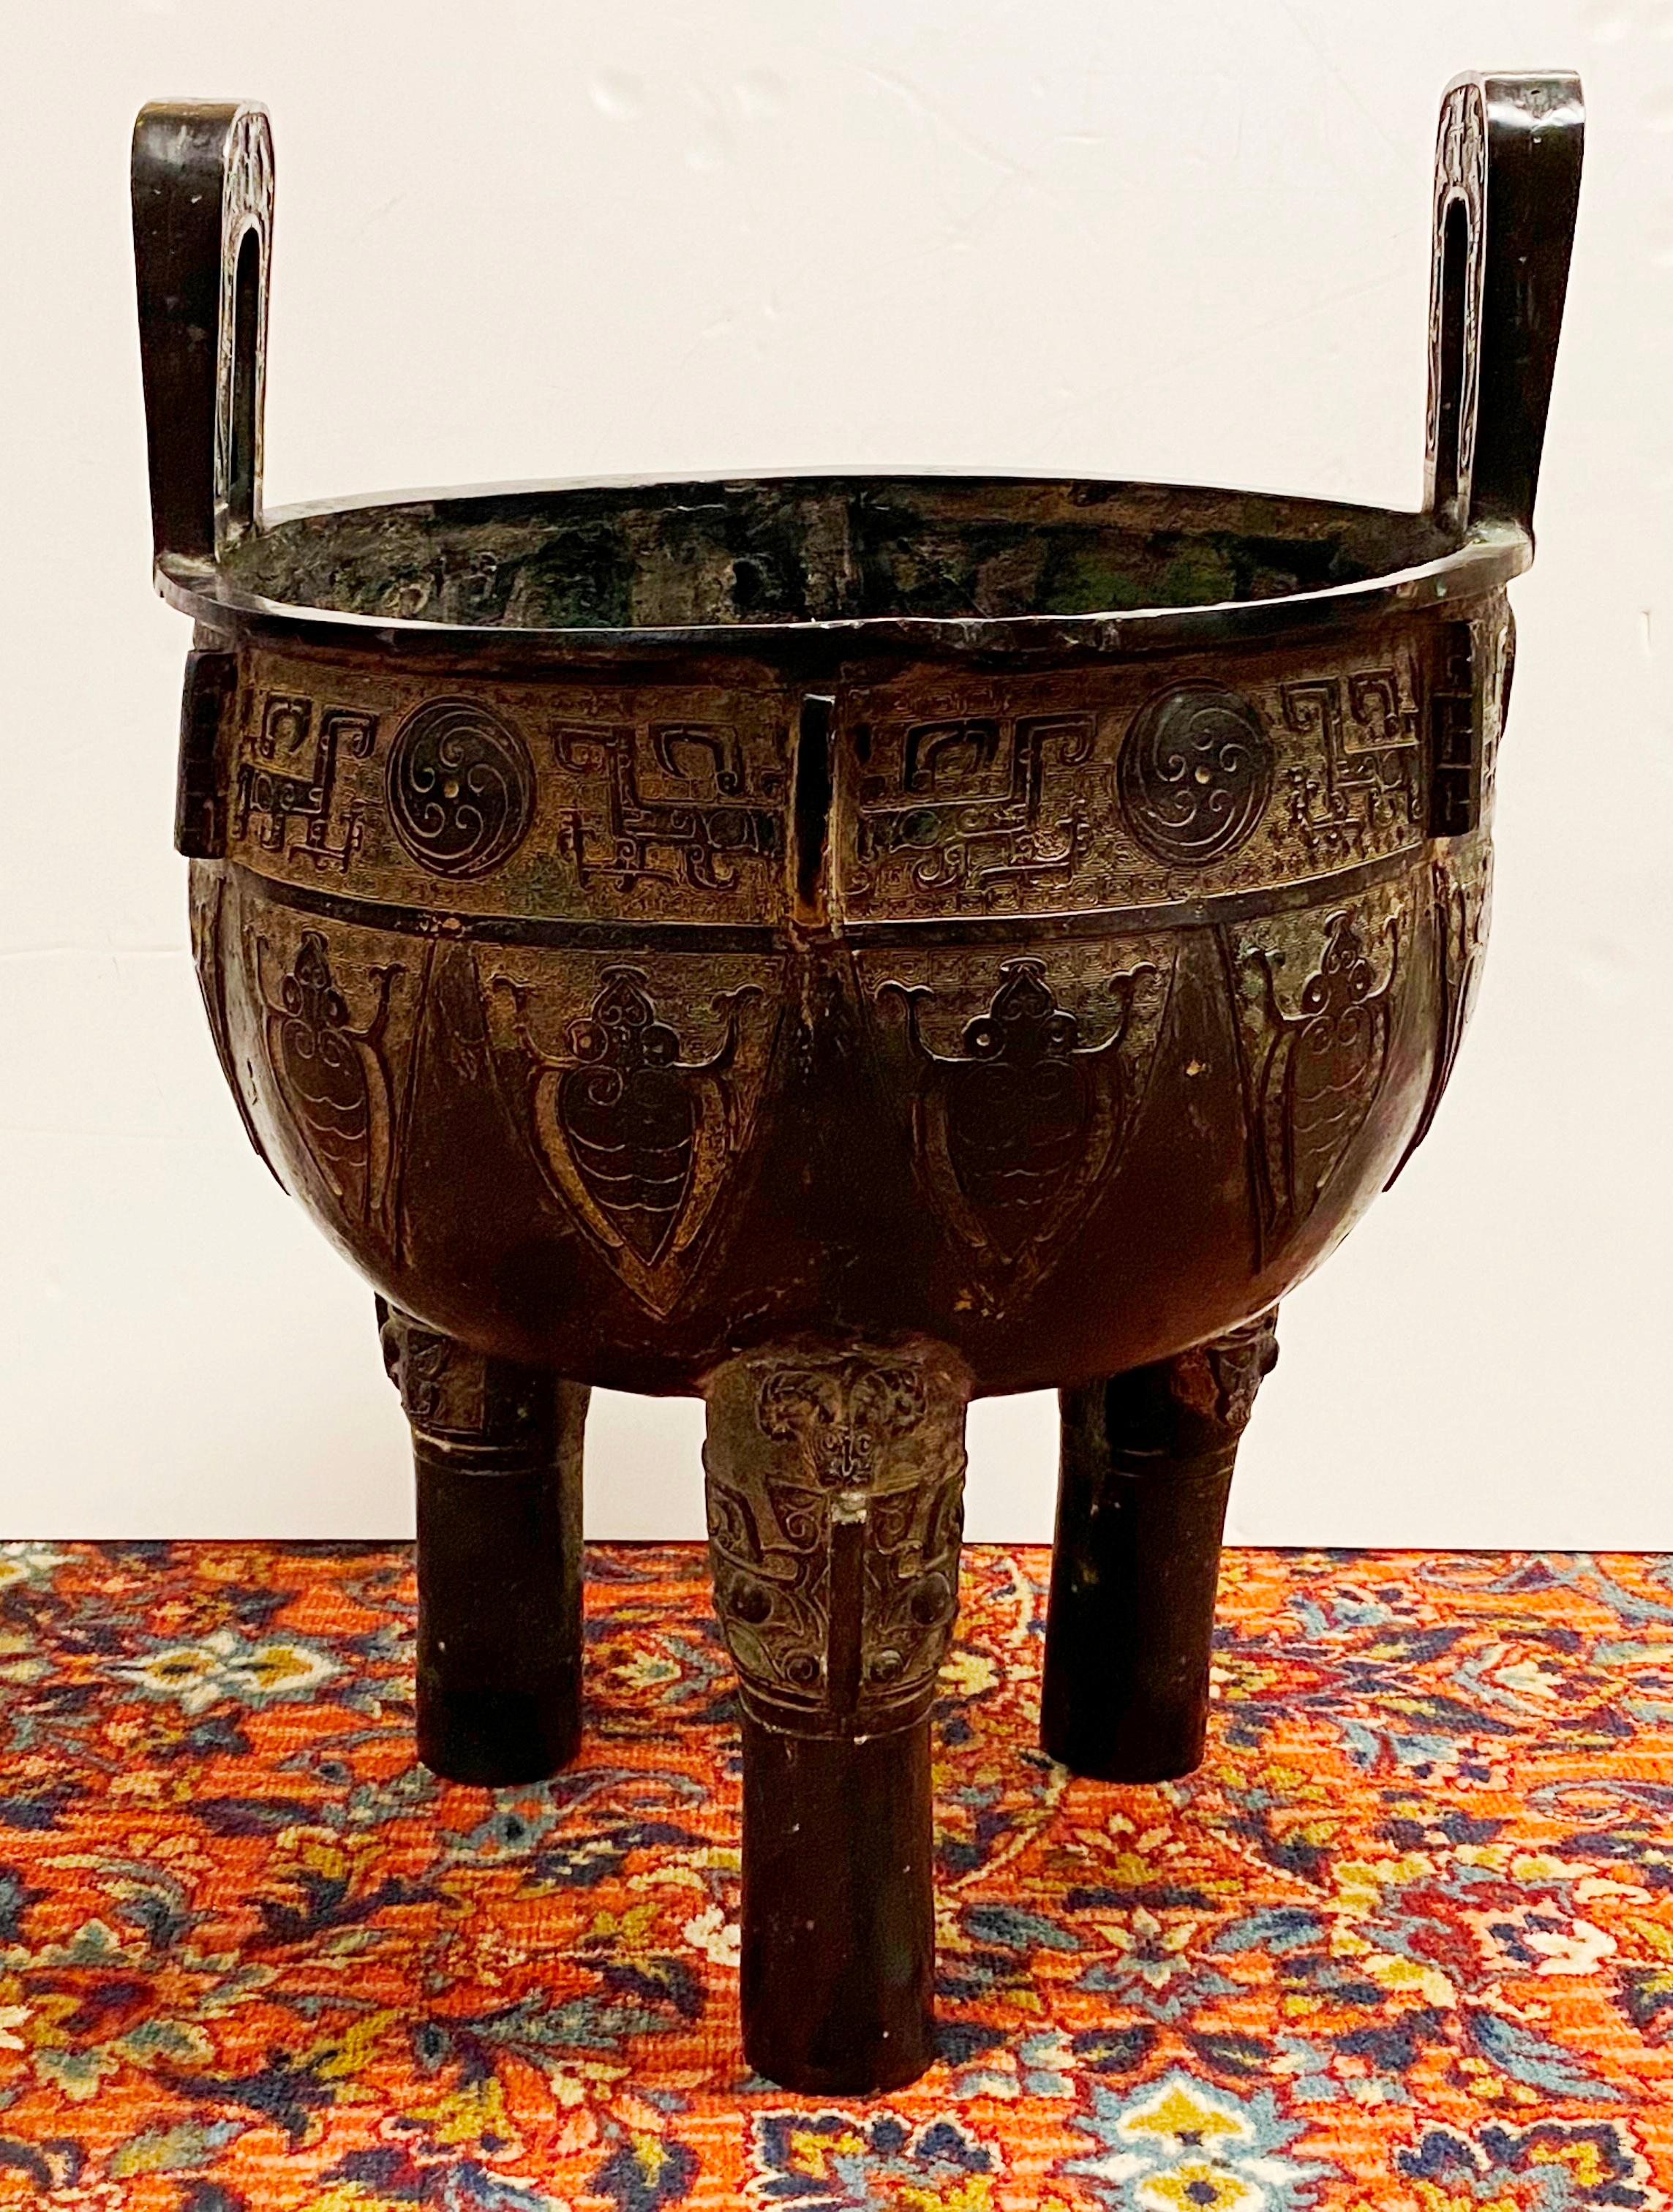 Chinese Archaic style monumental bronze tripod vessel with elaborate ornamentation and scarab motifs, marked on the bottom, circa early 20th century.